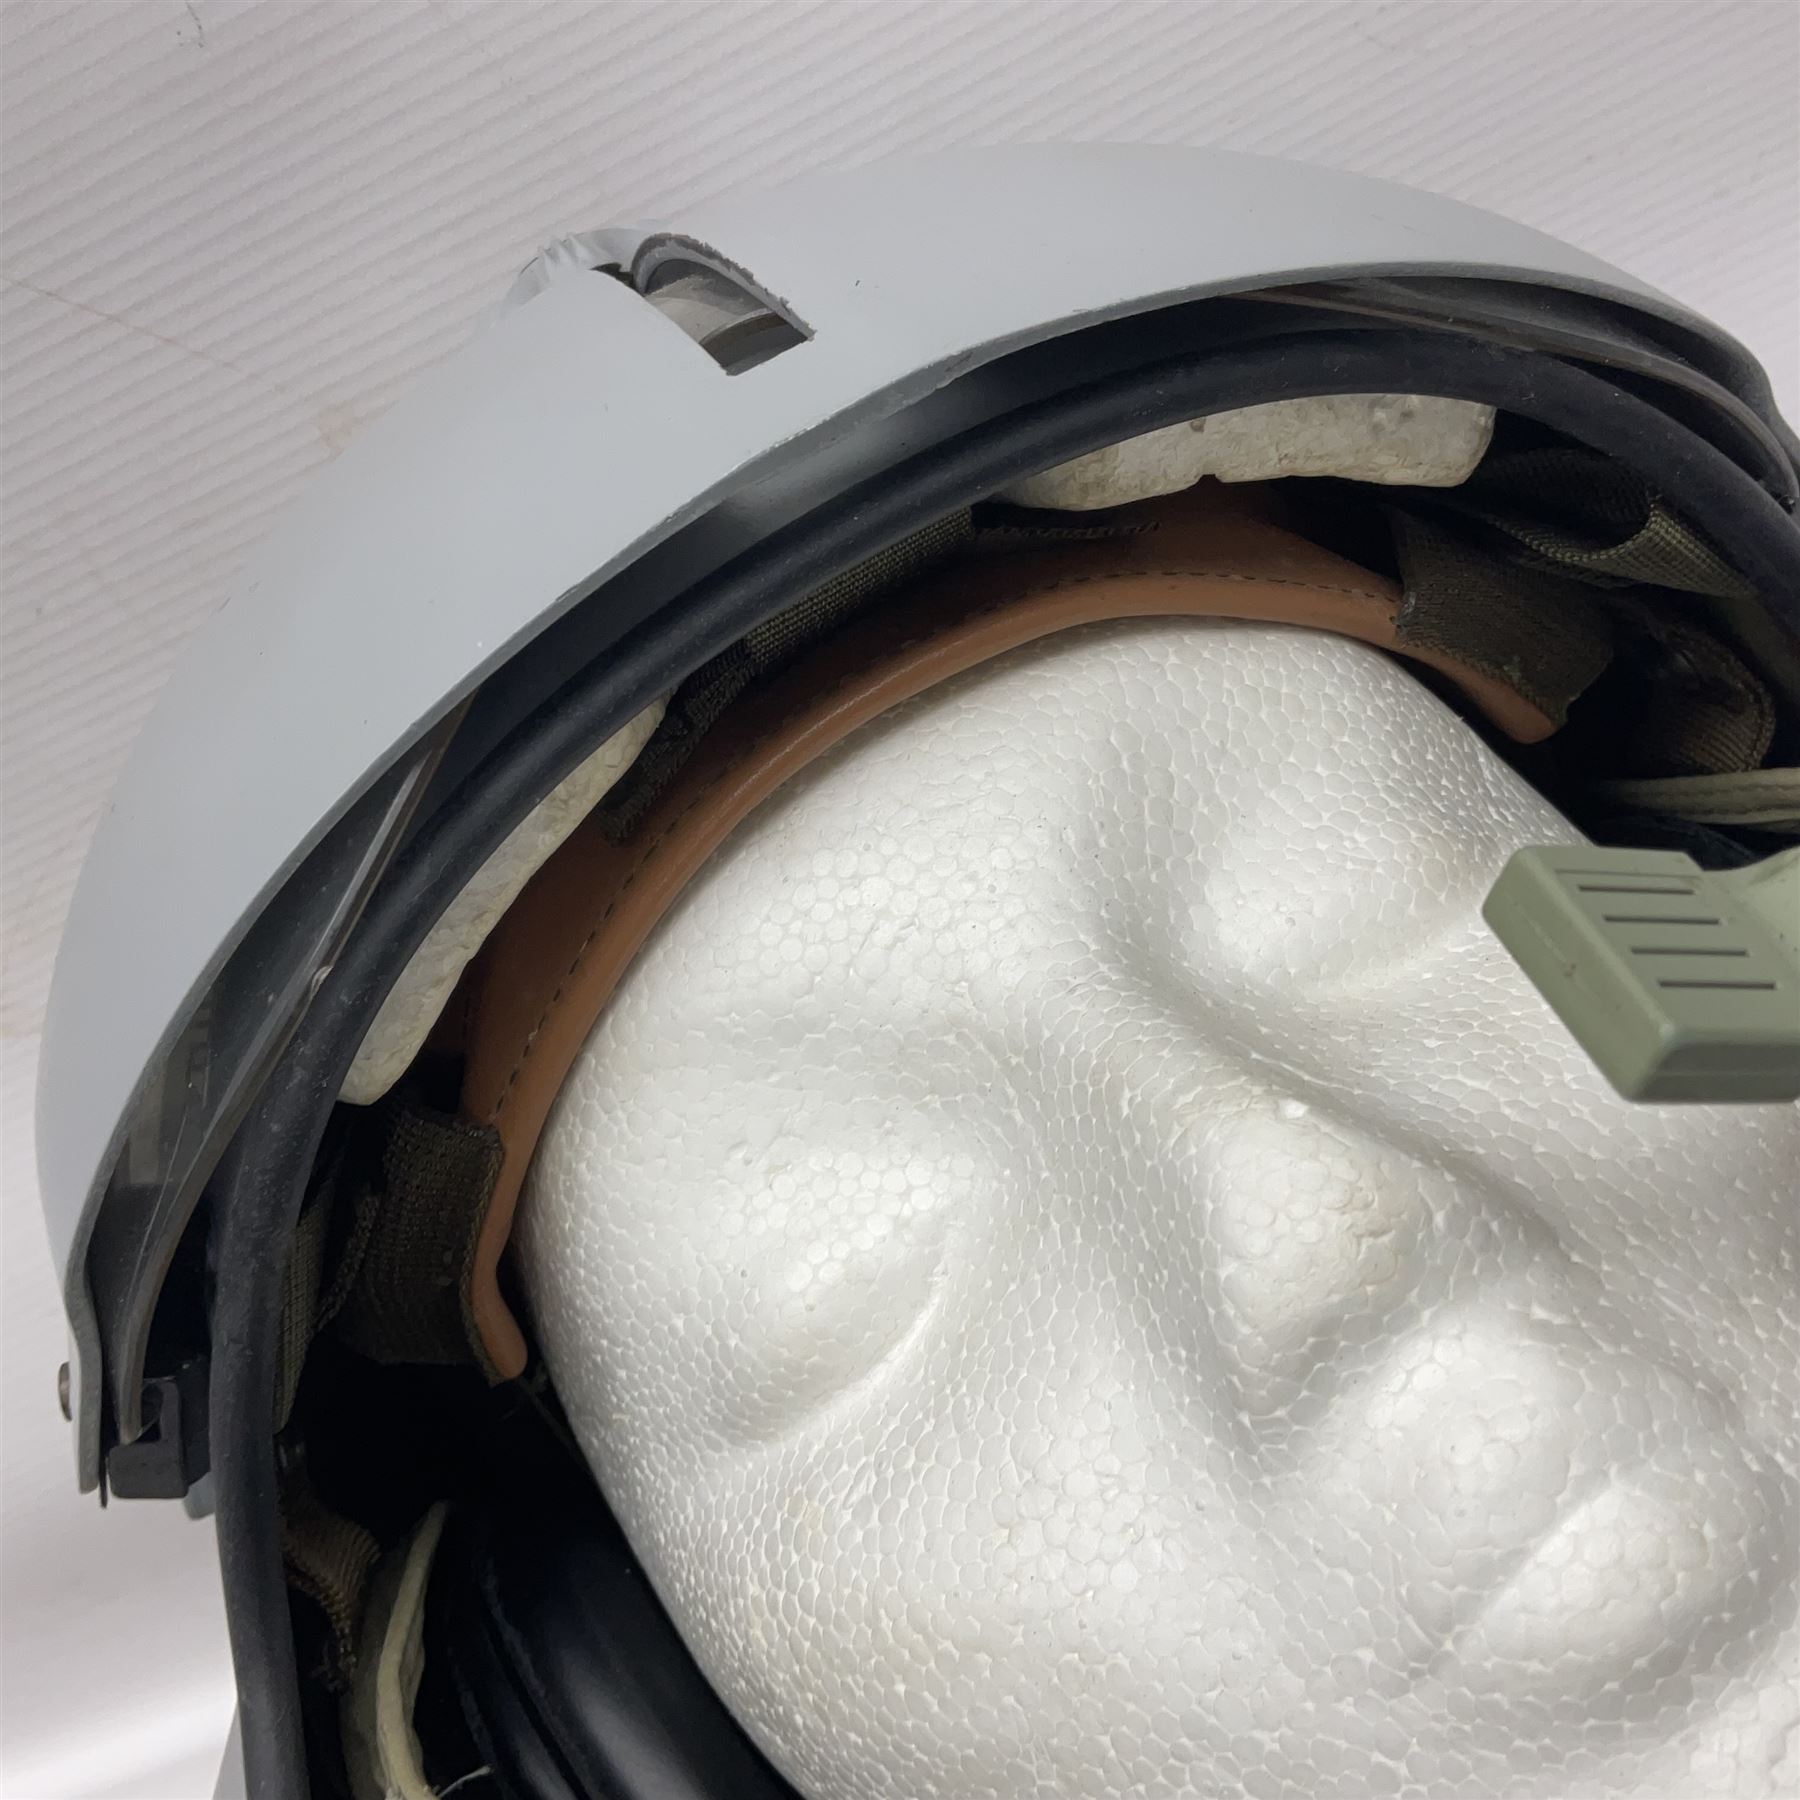 Silver grey SPH-4B Flight Helmet as used by helicopter pilots in the USAF and US Army in the 1990s; - Image 11 of 20